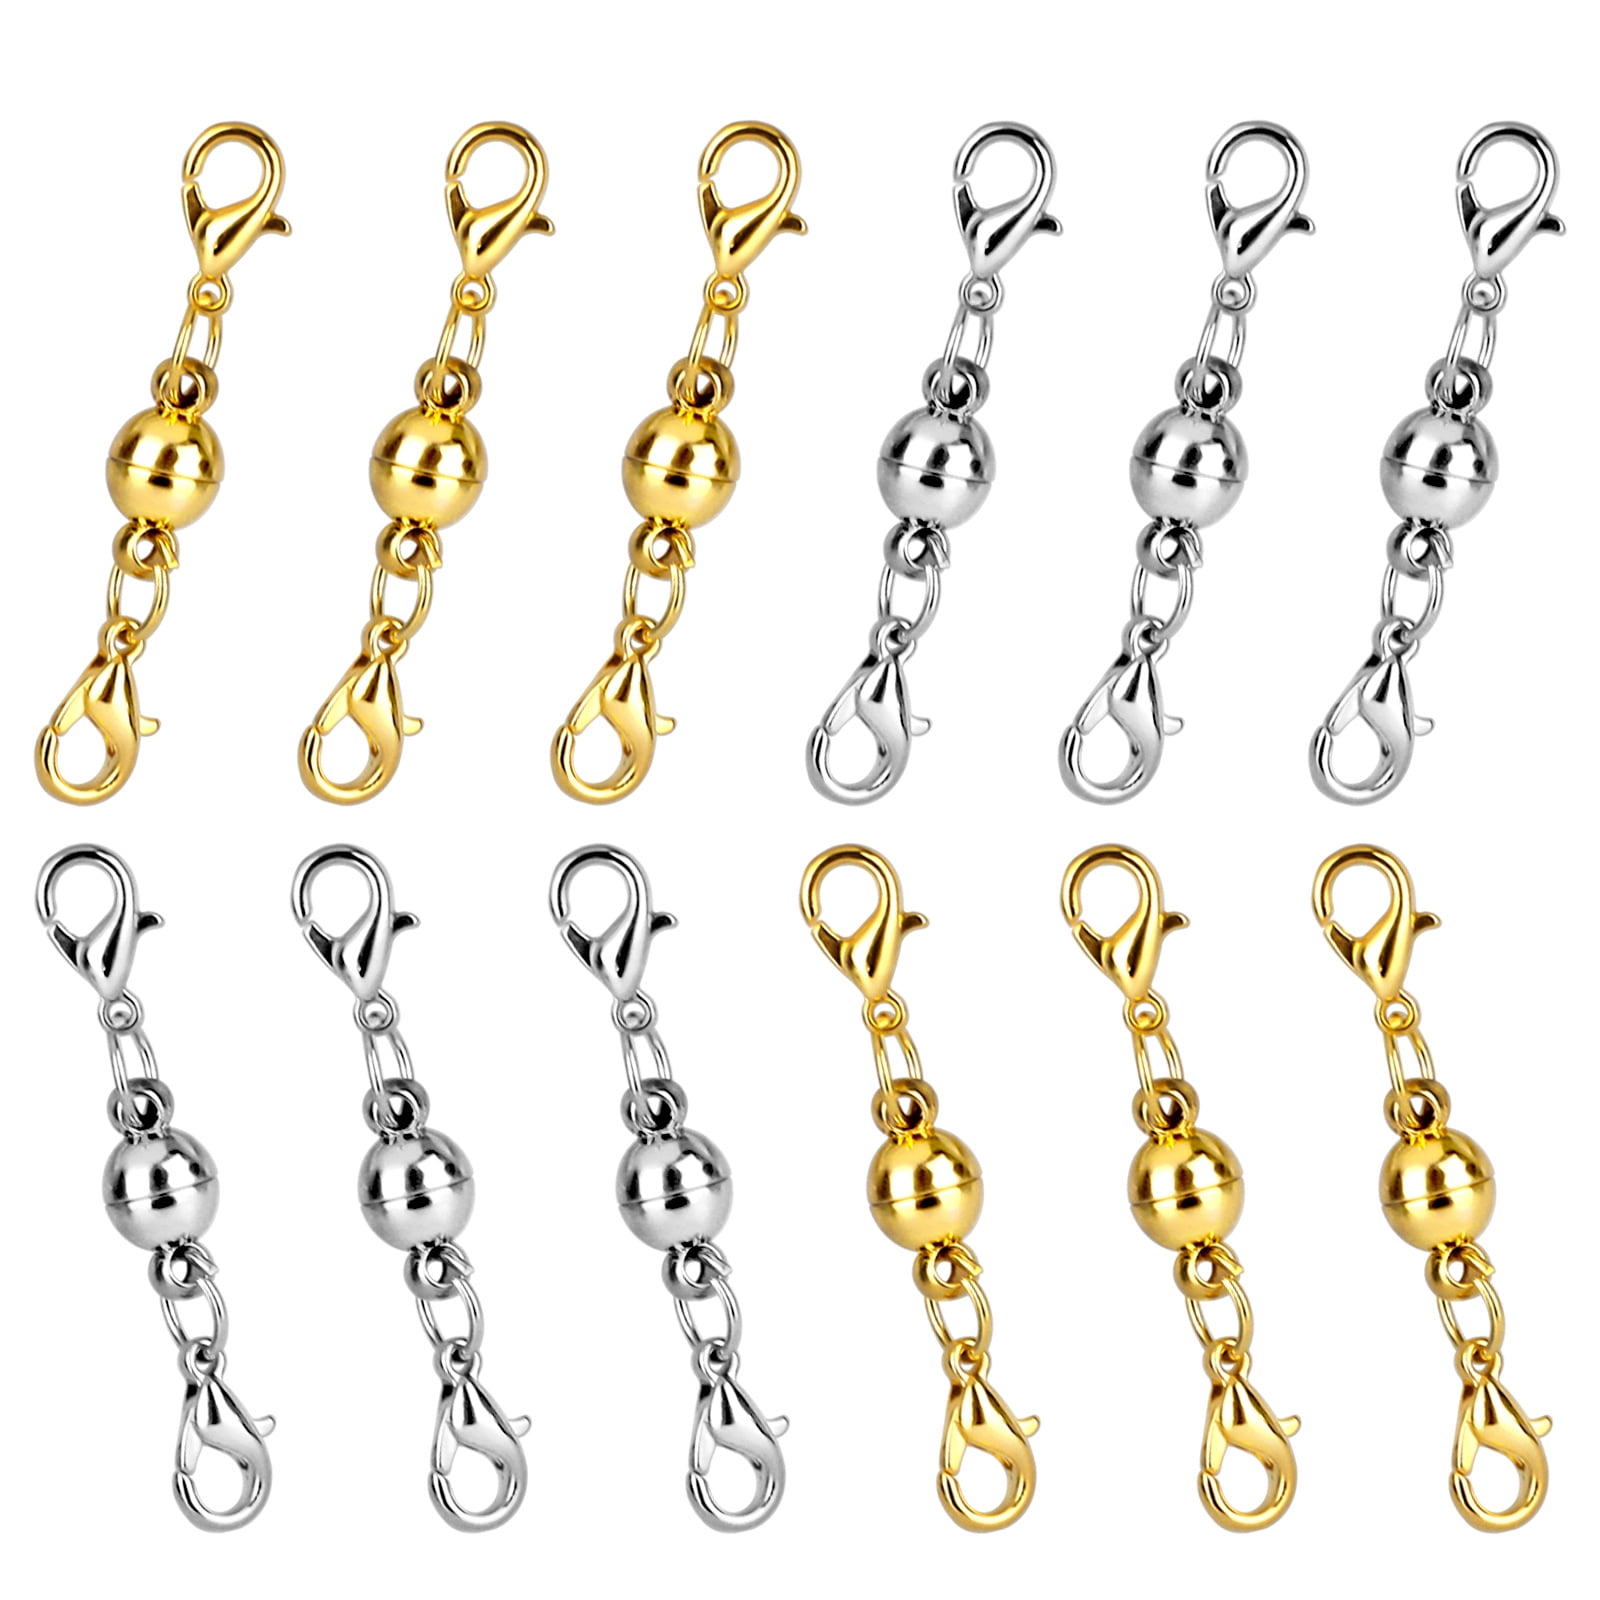 14K Gold Jewelry Lobster Clasp w/ Jump Ring Necklace Lock Replacement New